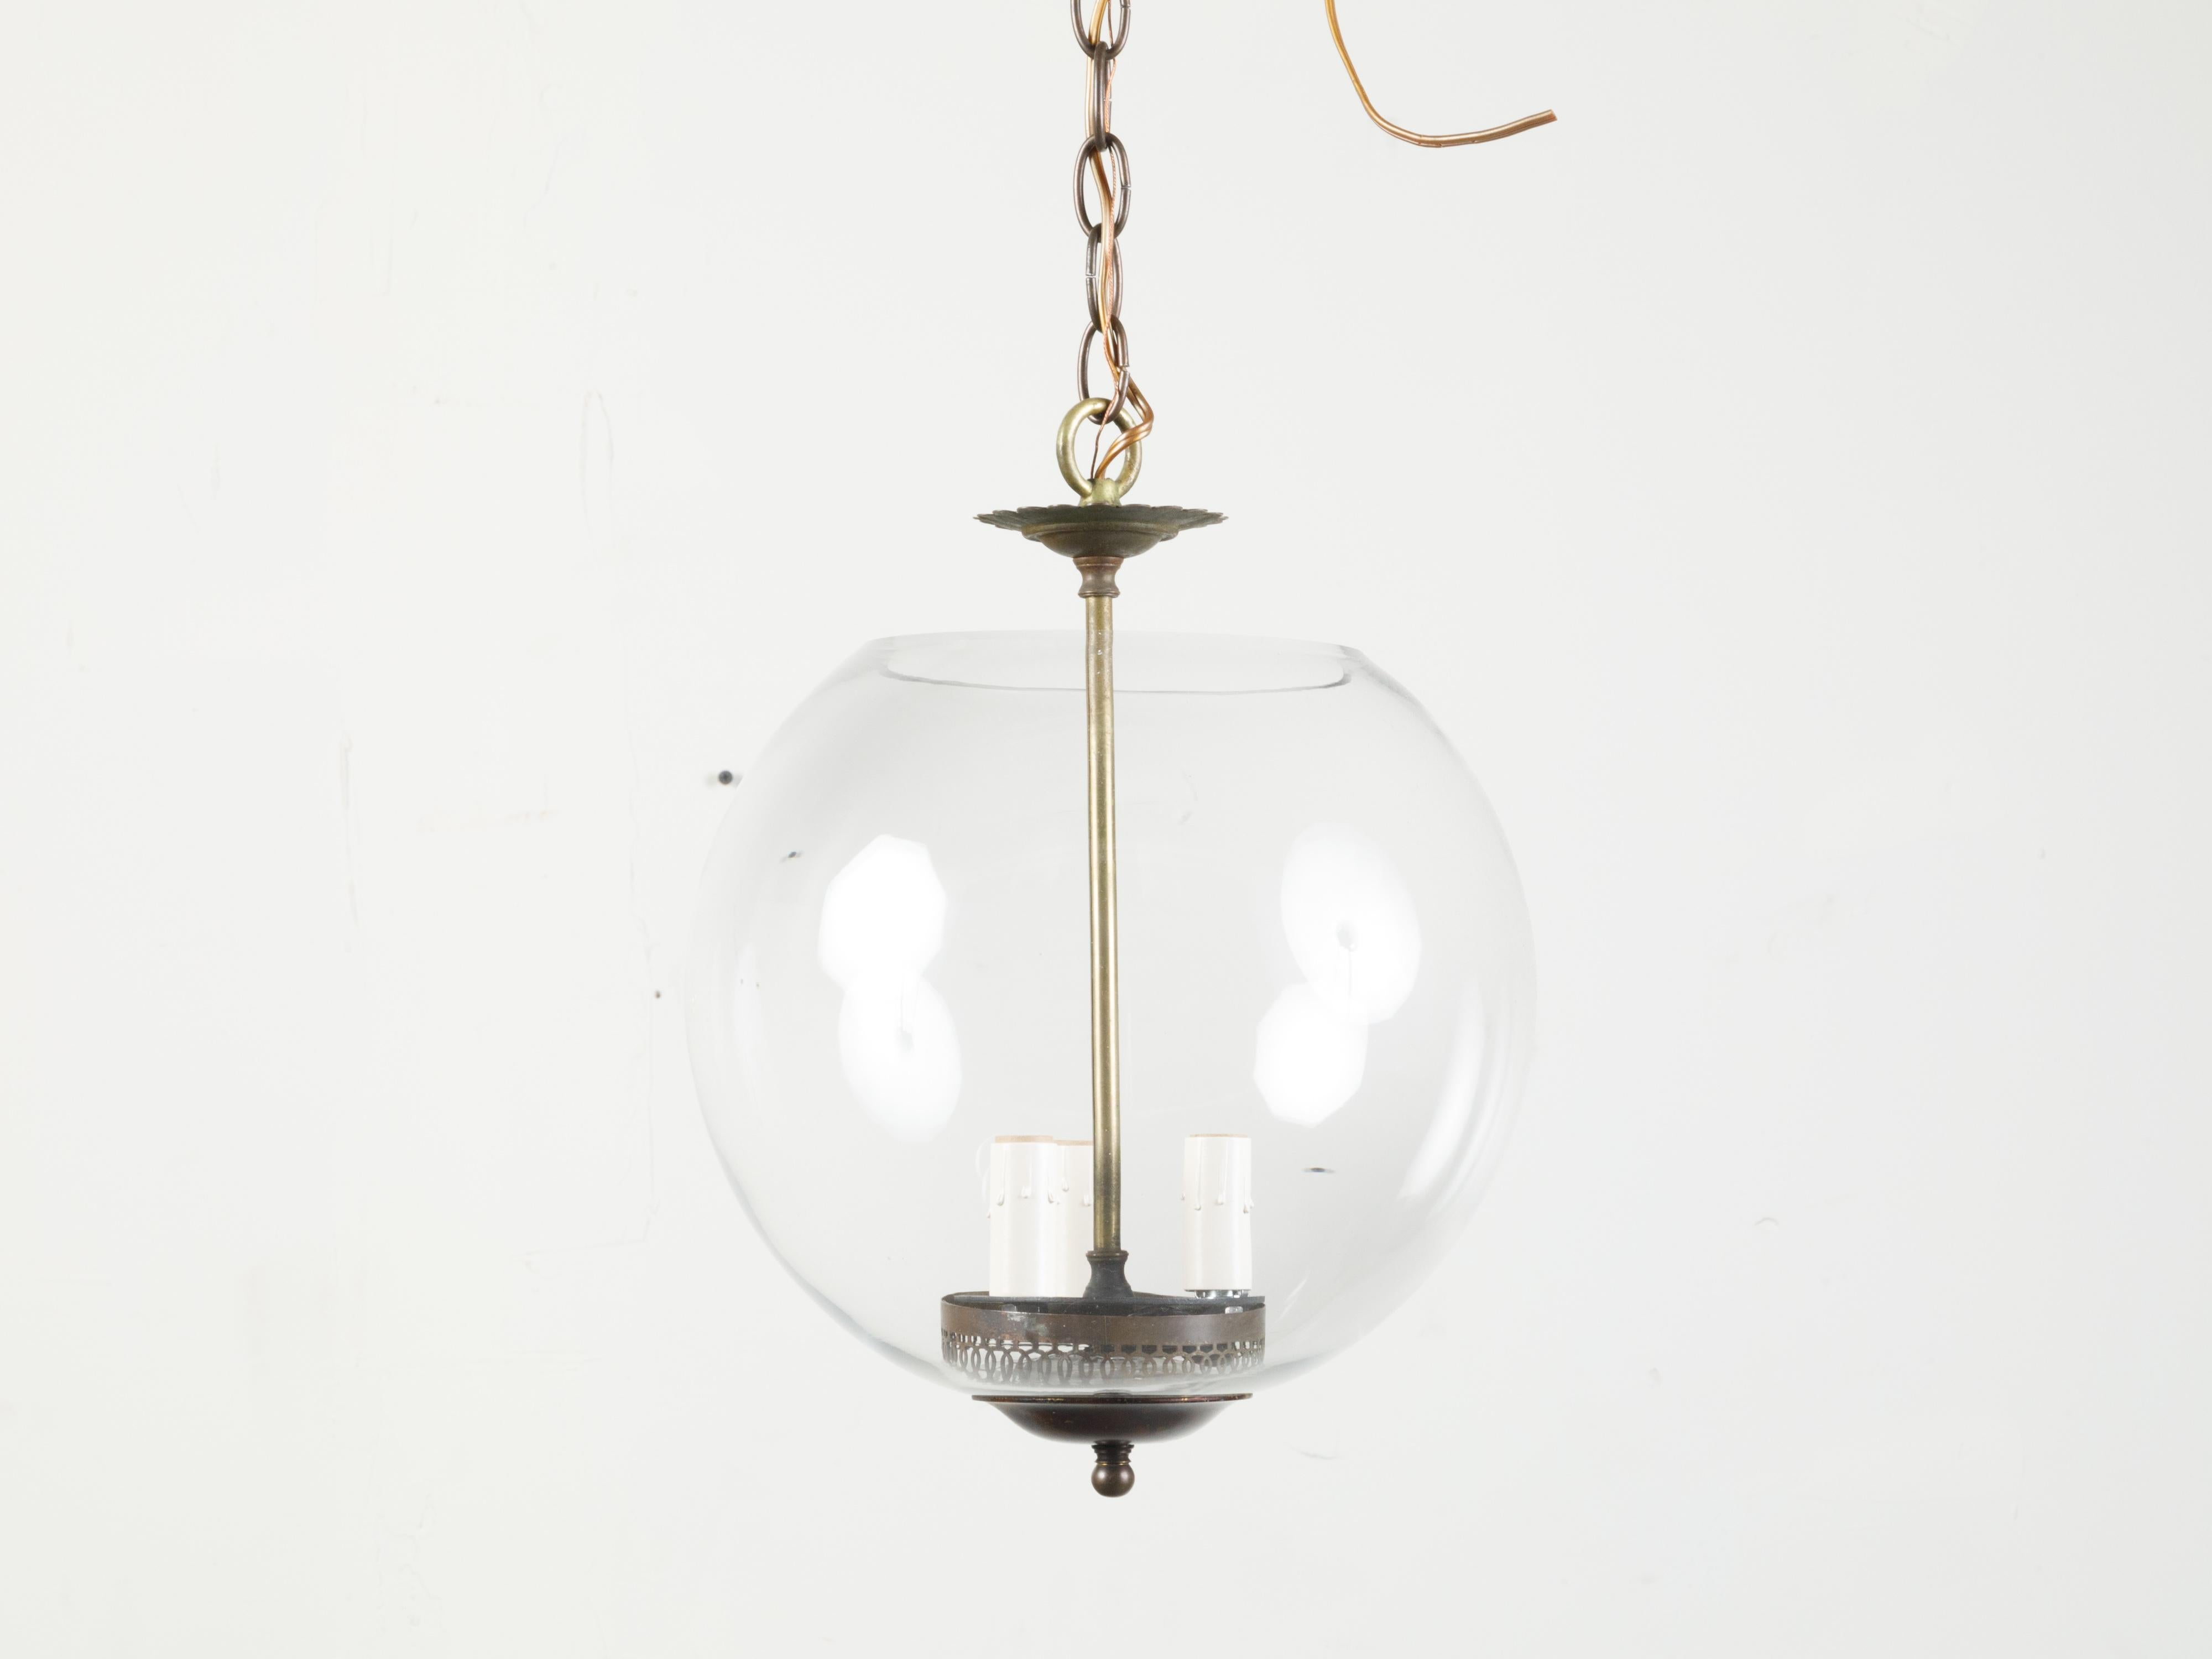 A vintage glass sphere light fixture from the mid 20th century, with three lights, rewired for the US. Created during the 20th century, this vintage glass light fixture features a spherical body securing three light bulbs connected to a central